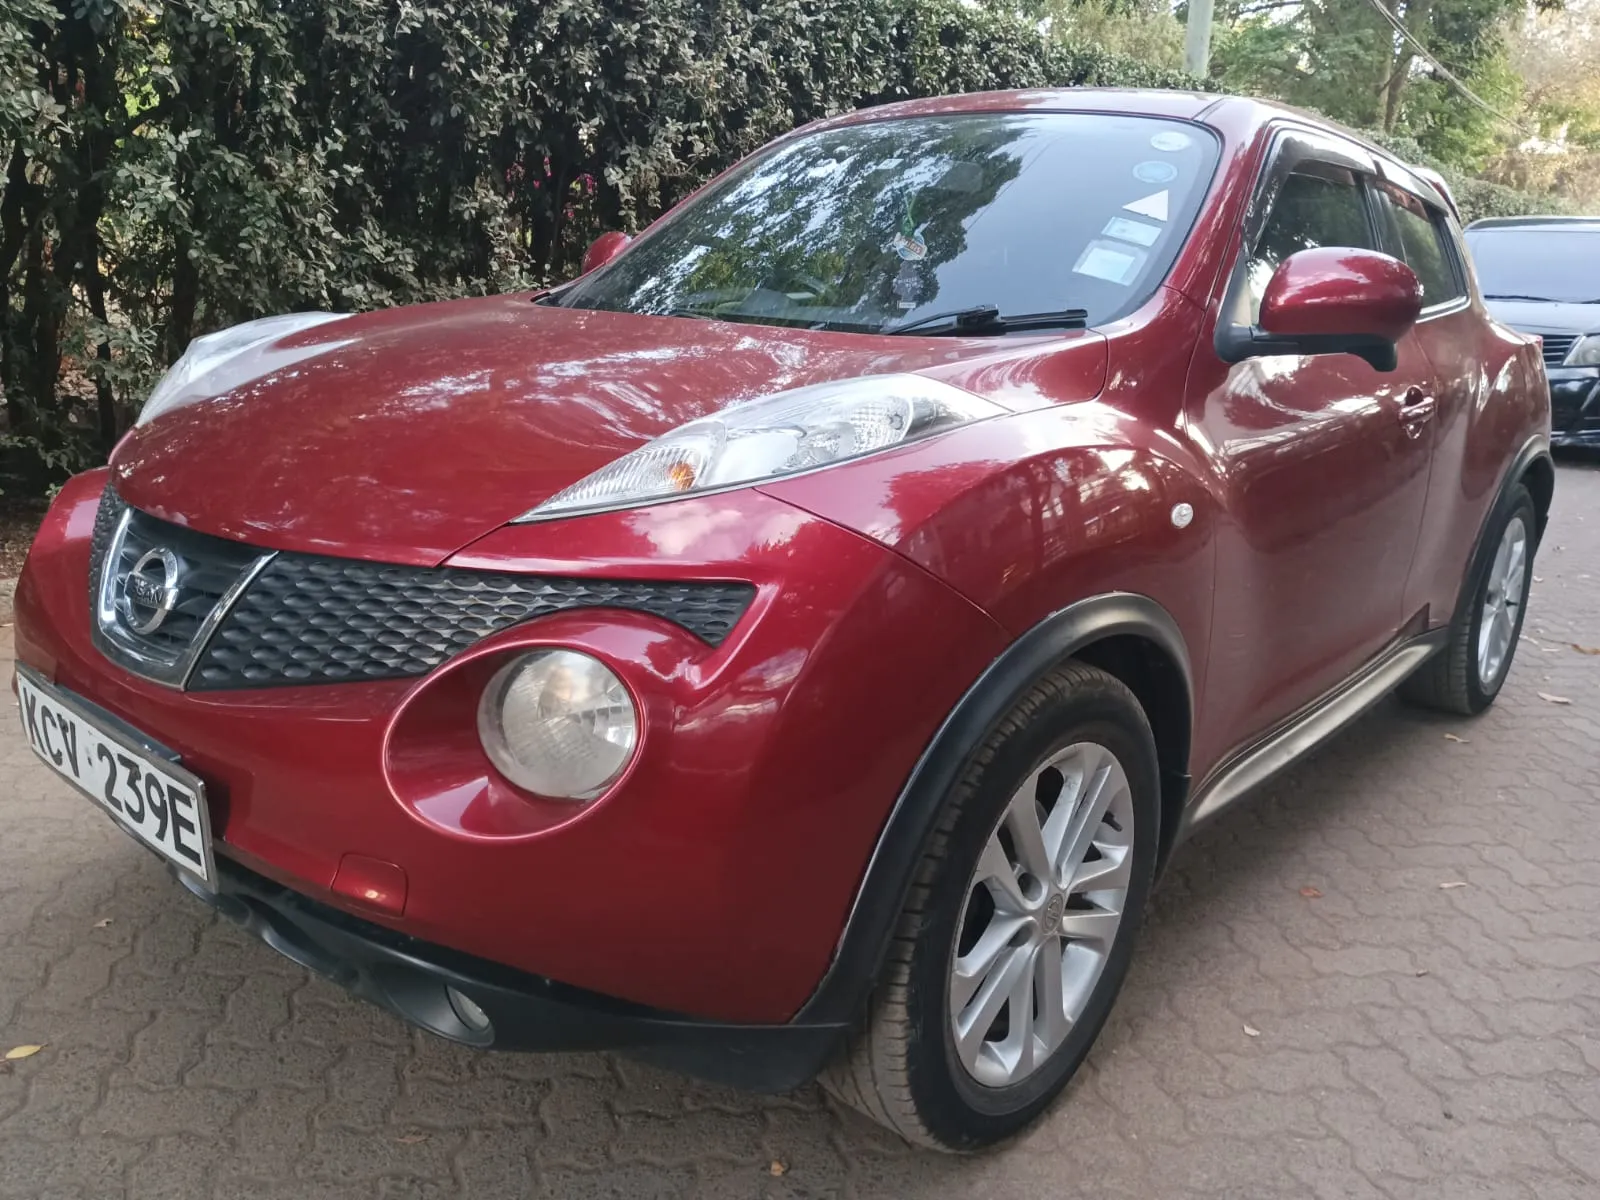 Nissan Juke 2012 Wine Red You Pay 20% Deposit Trade in Ok Wow!